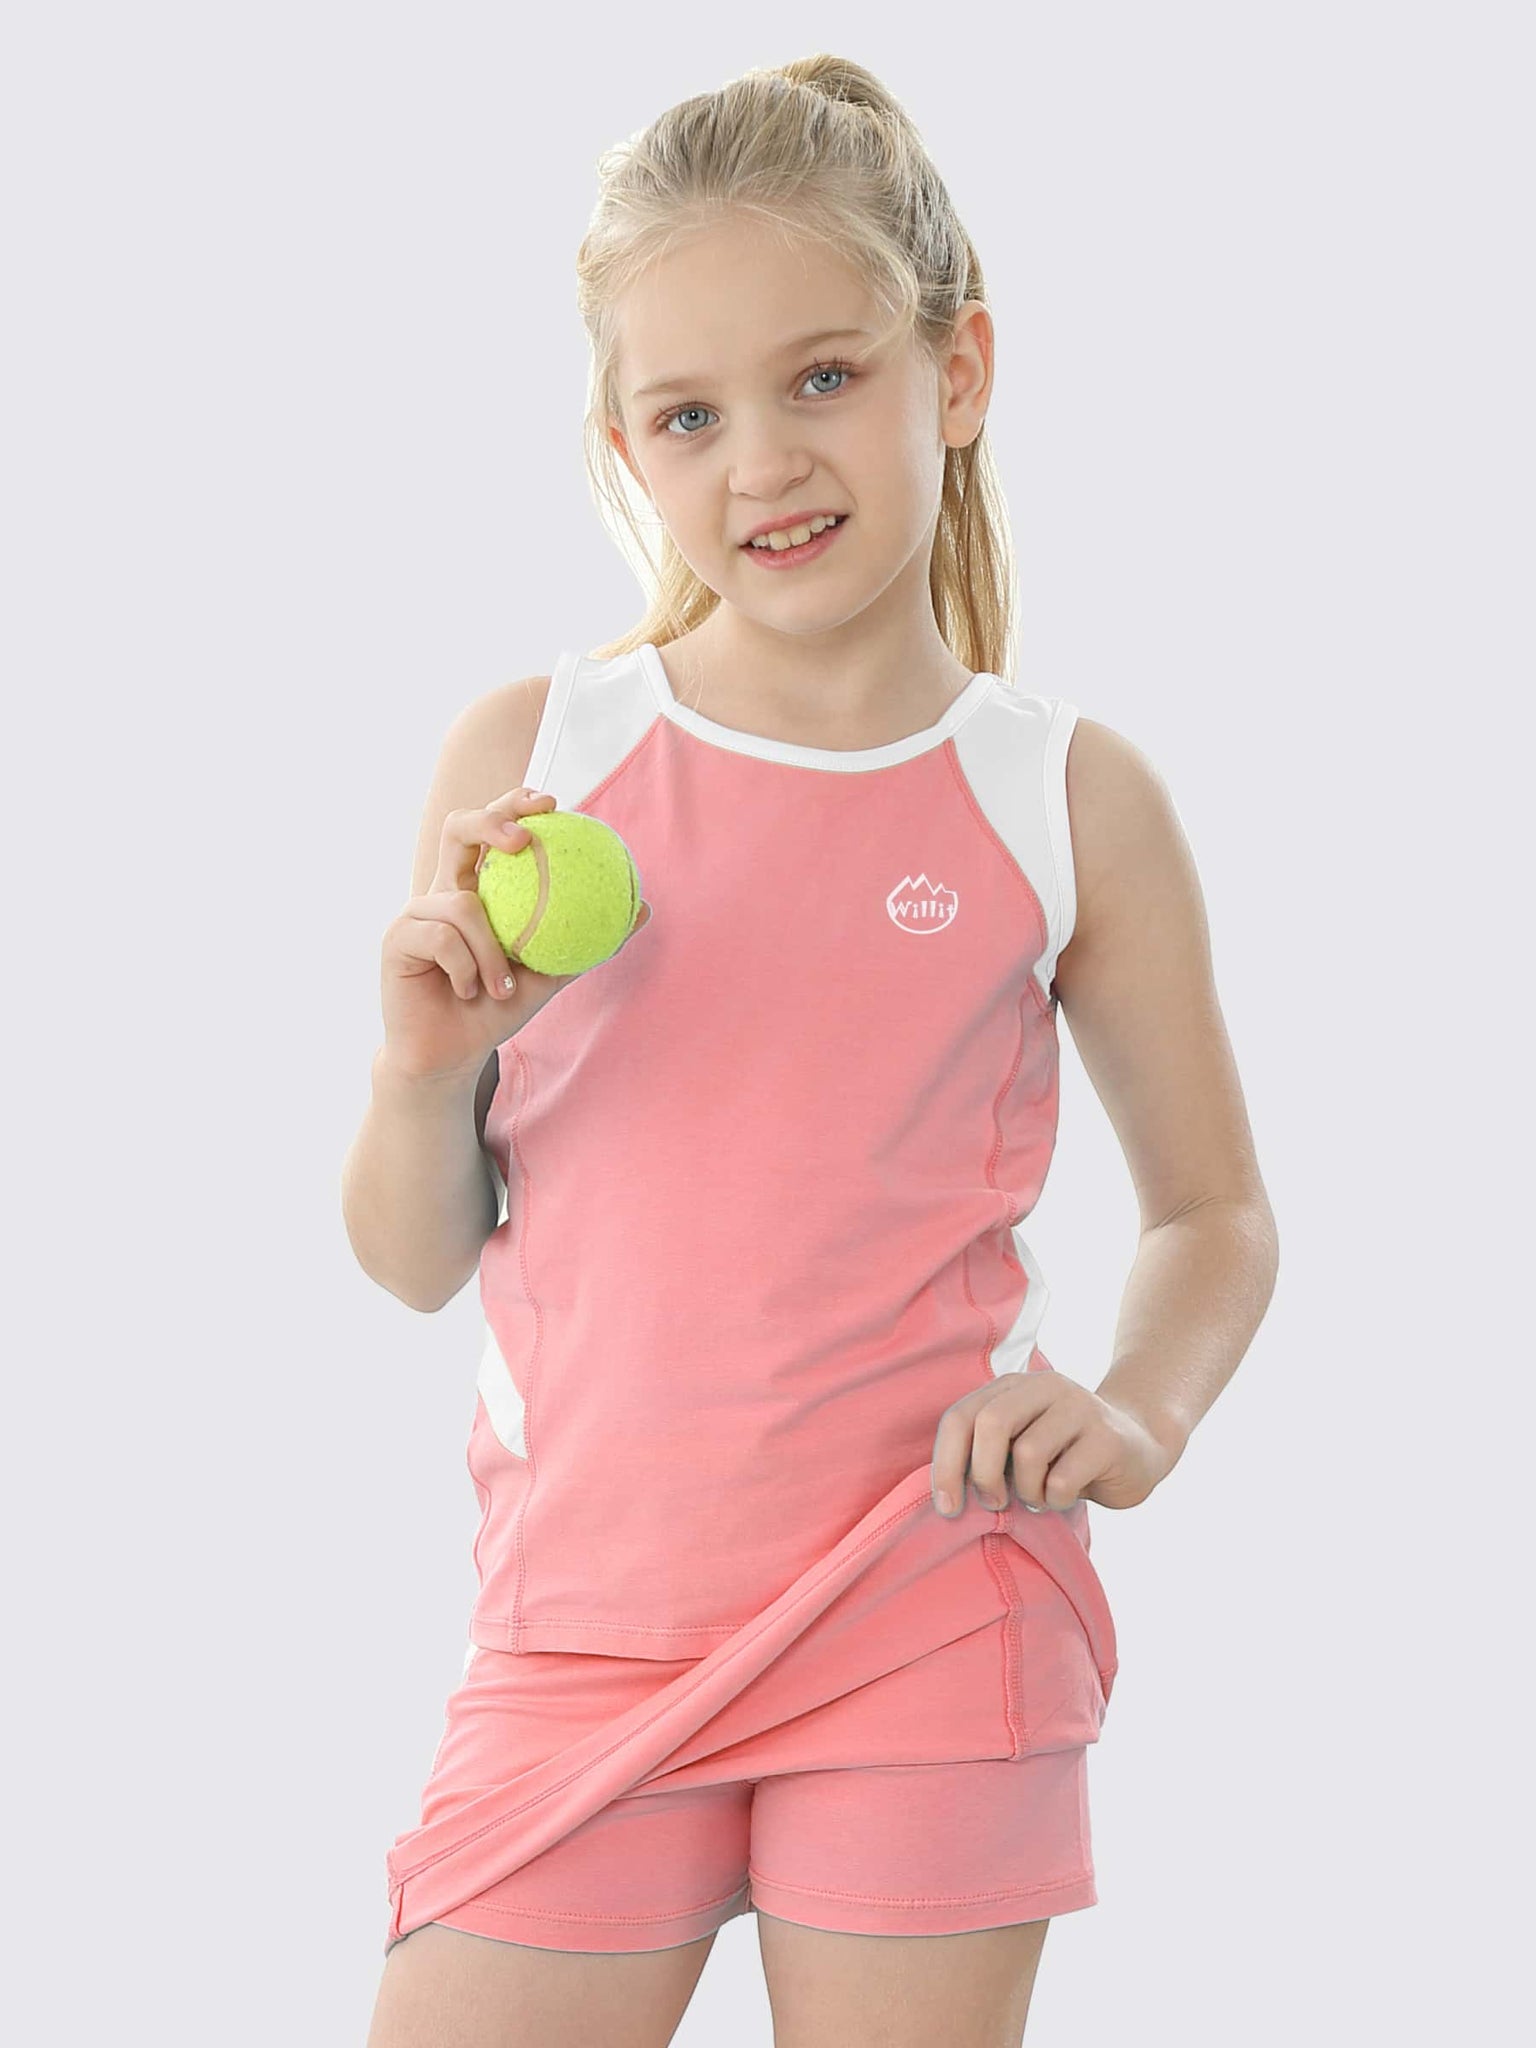 Willit Girls' Tennis Outfit_Pink_model3